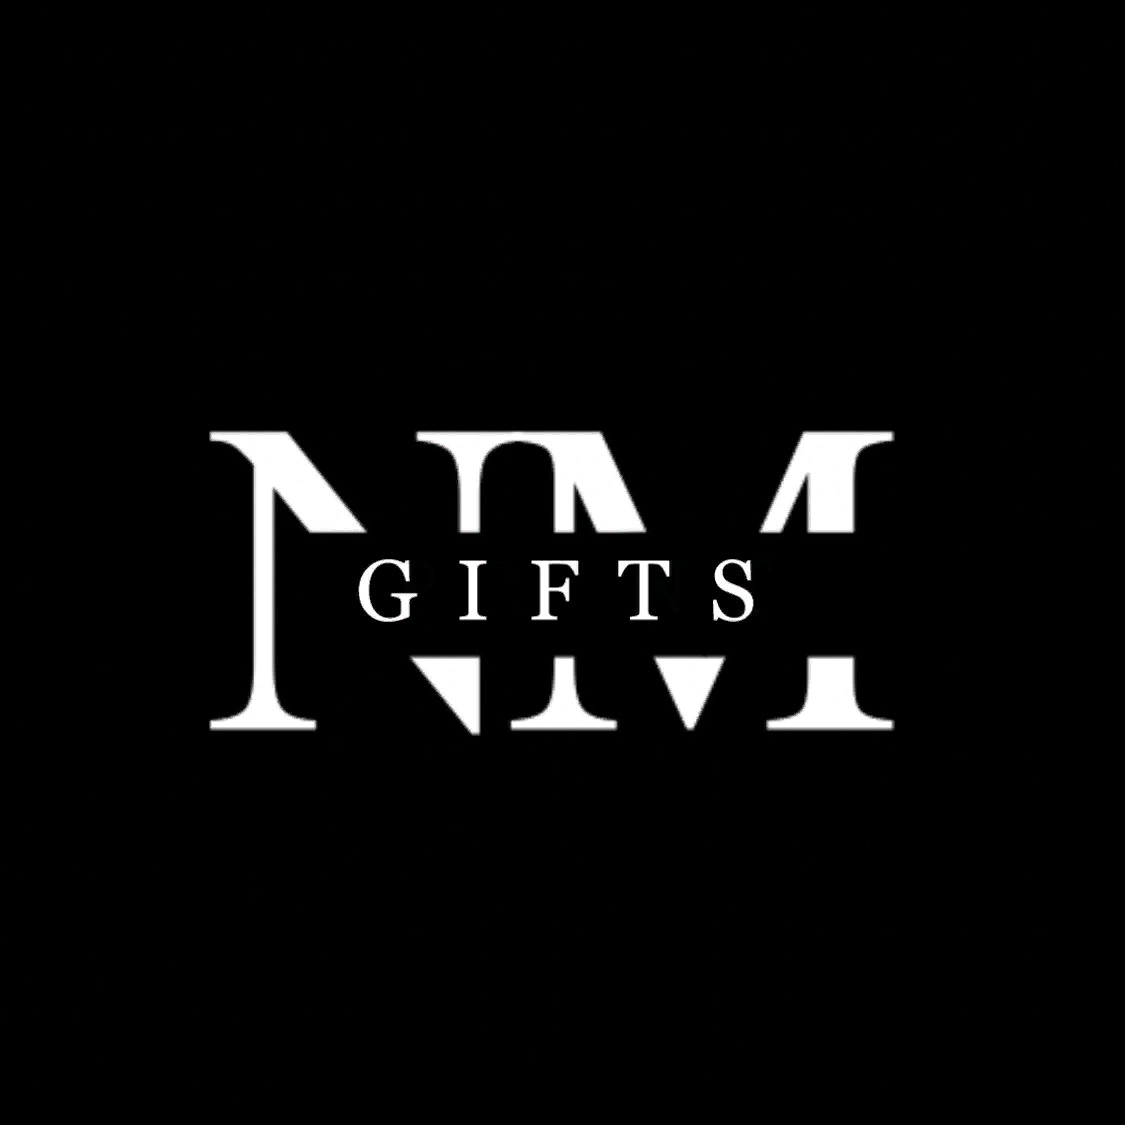 NmGifts